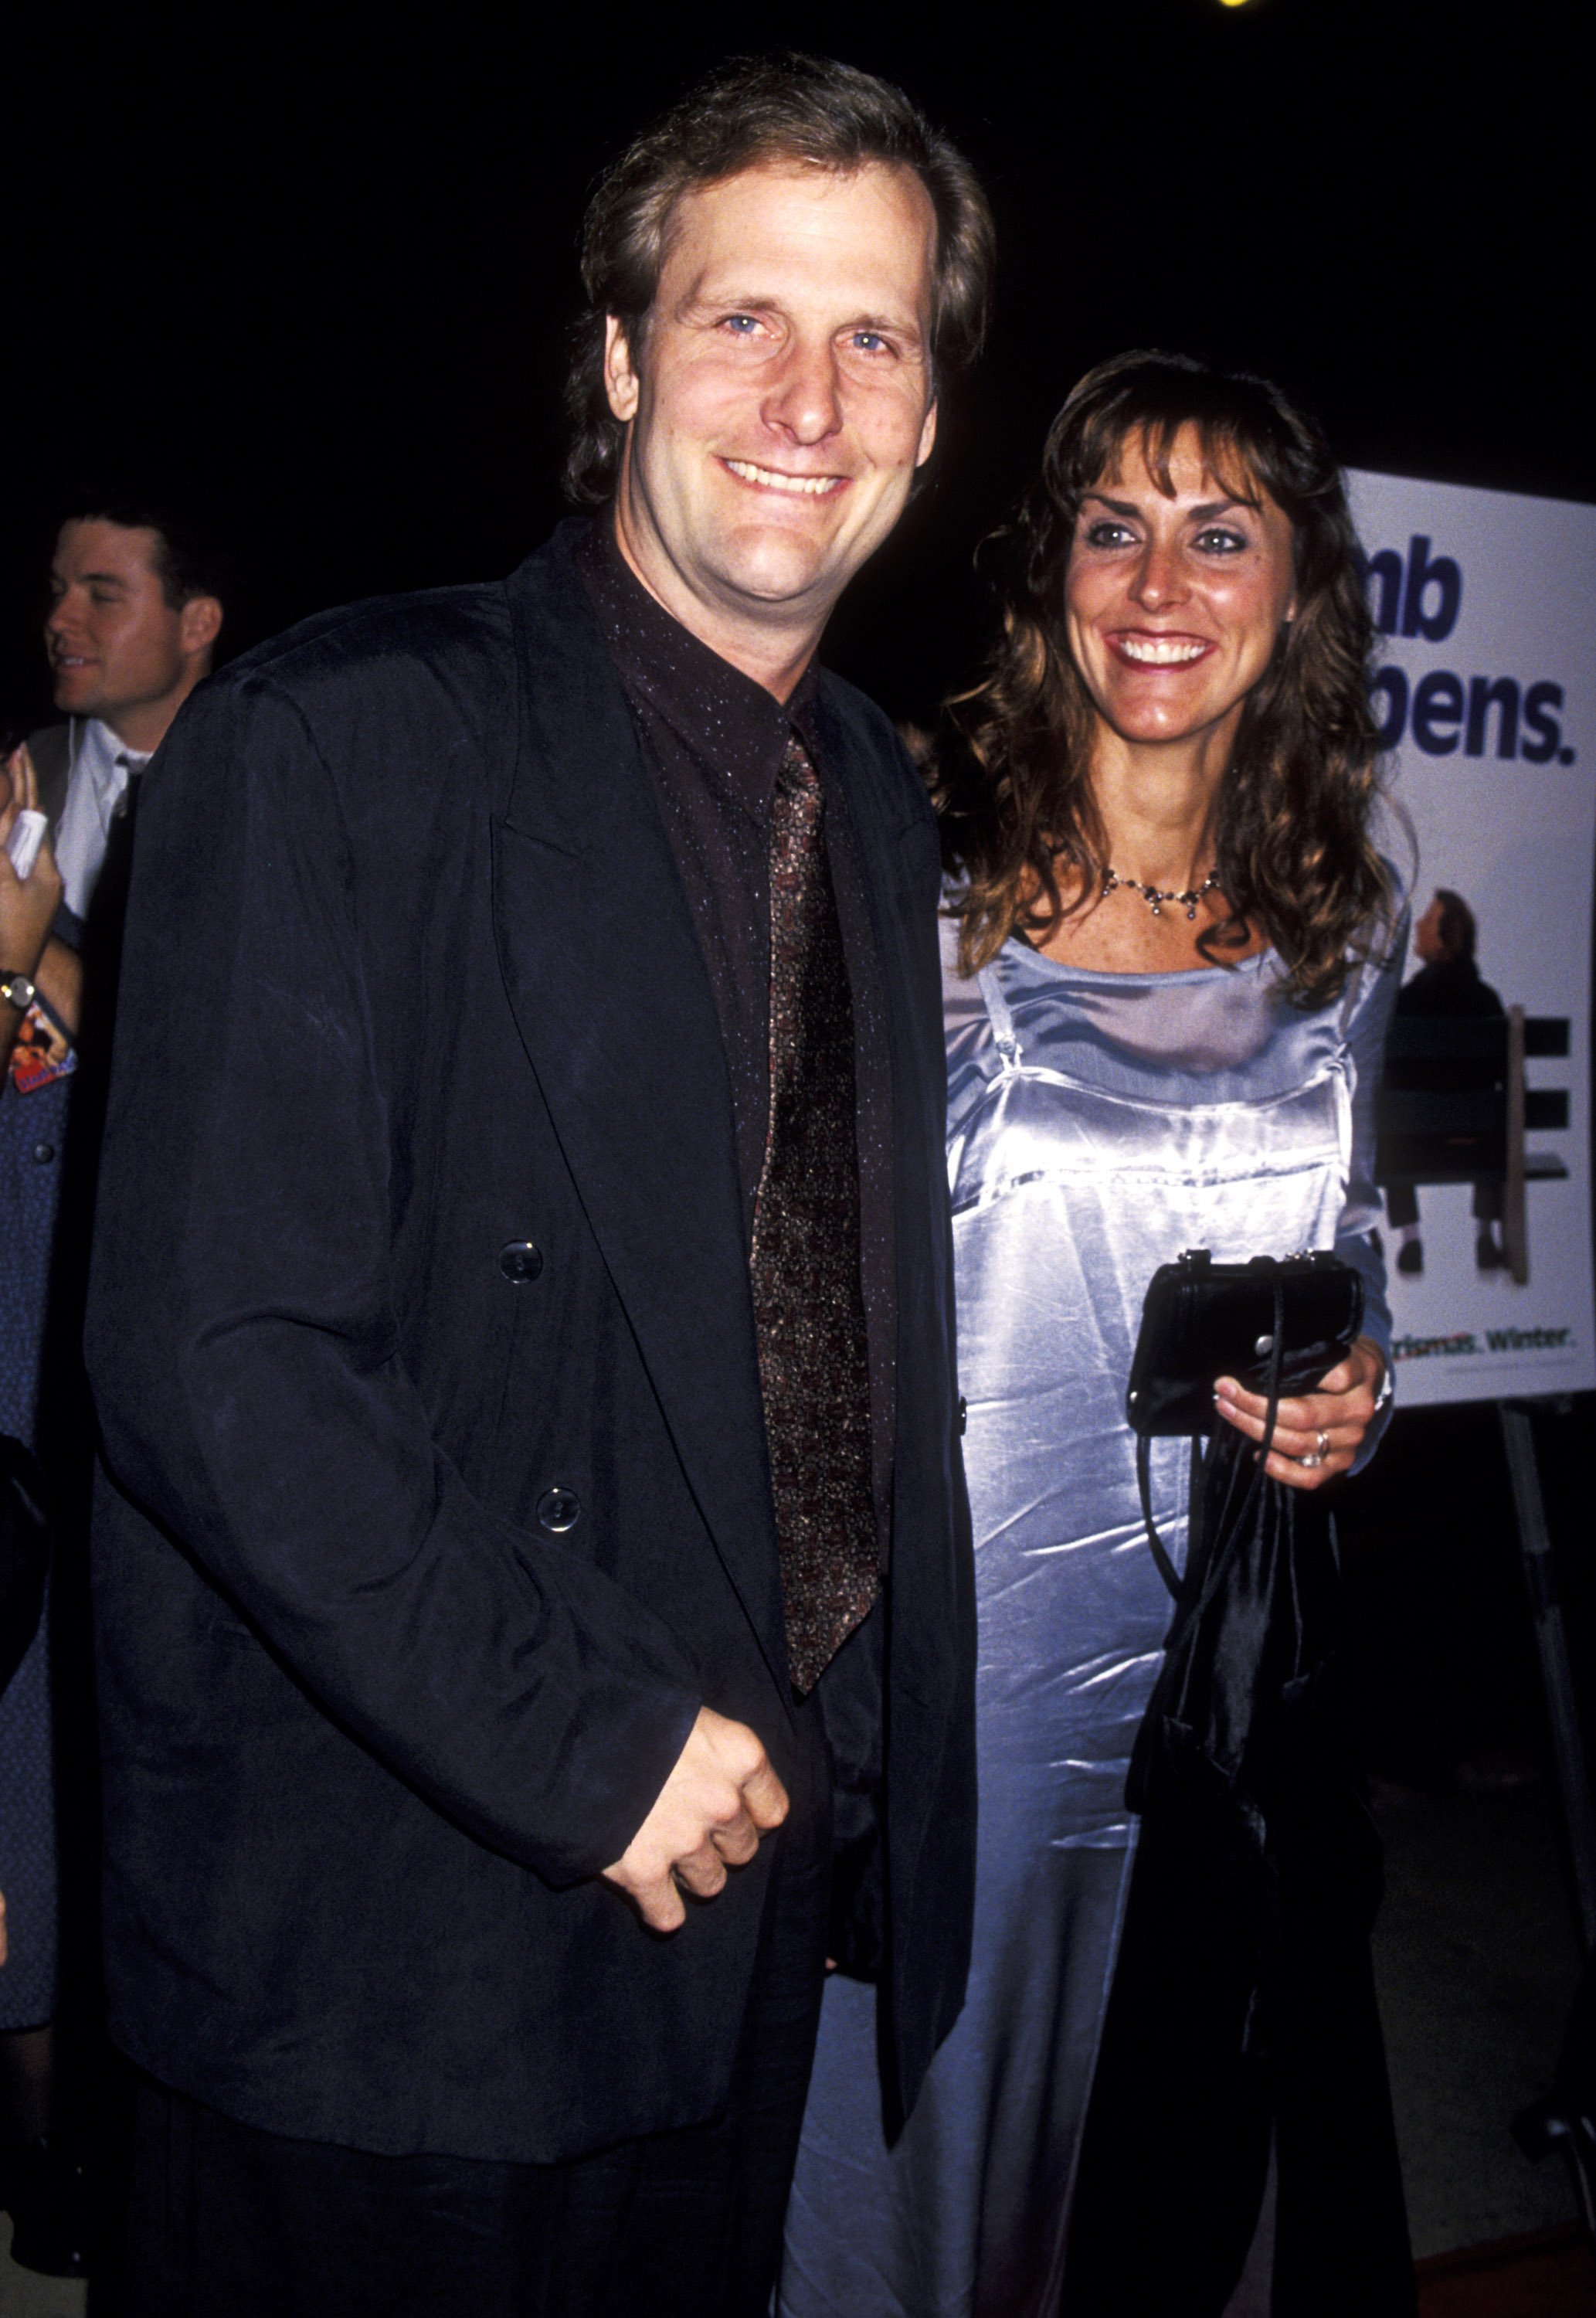 Jeff Daniels and Kathleen Treado during the "Dumb and Dumber" Hollywood premiere in California on  December 6, 1994. | Source: Ron Galella/Ron Galella Collection/Getty Images